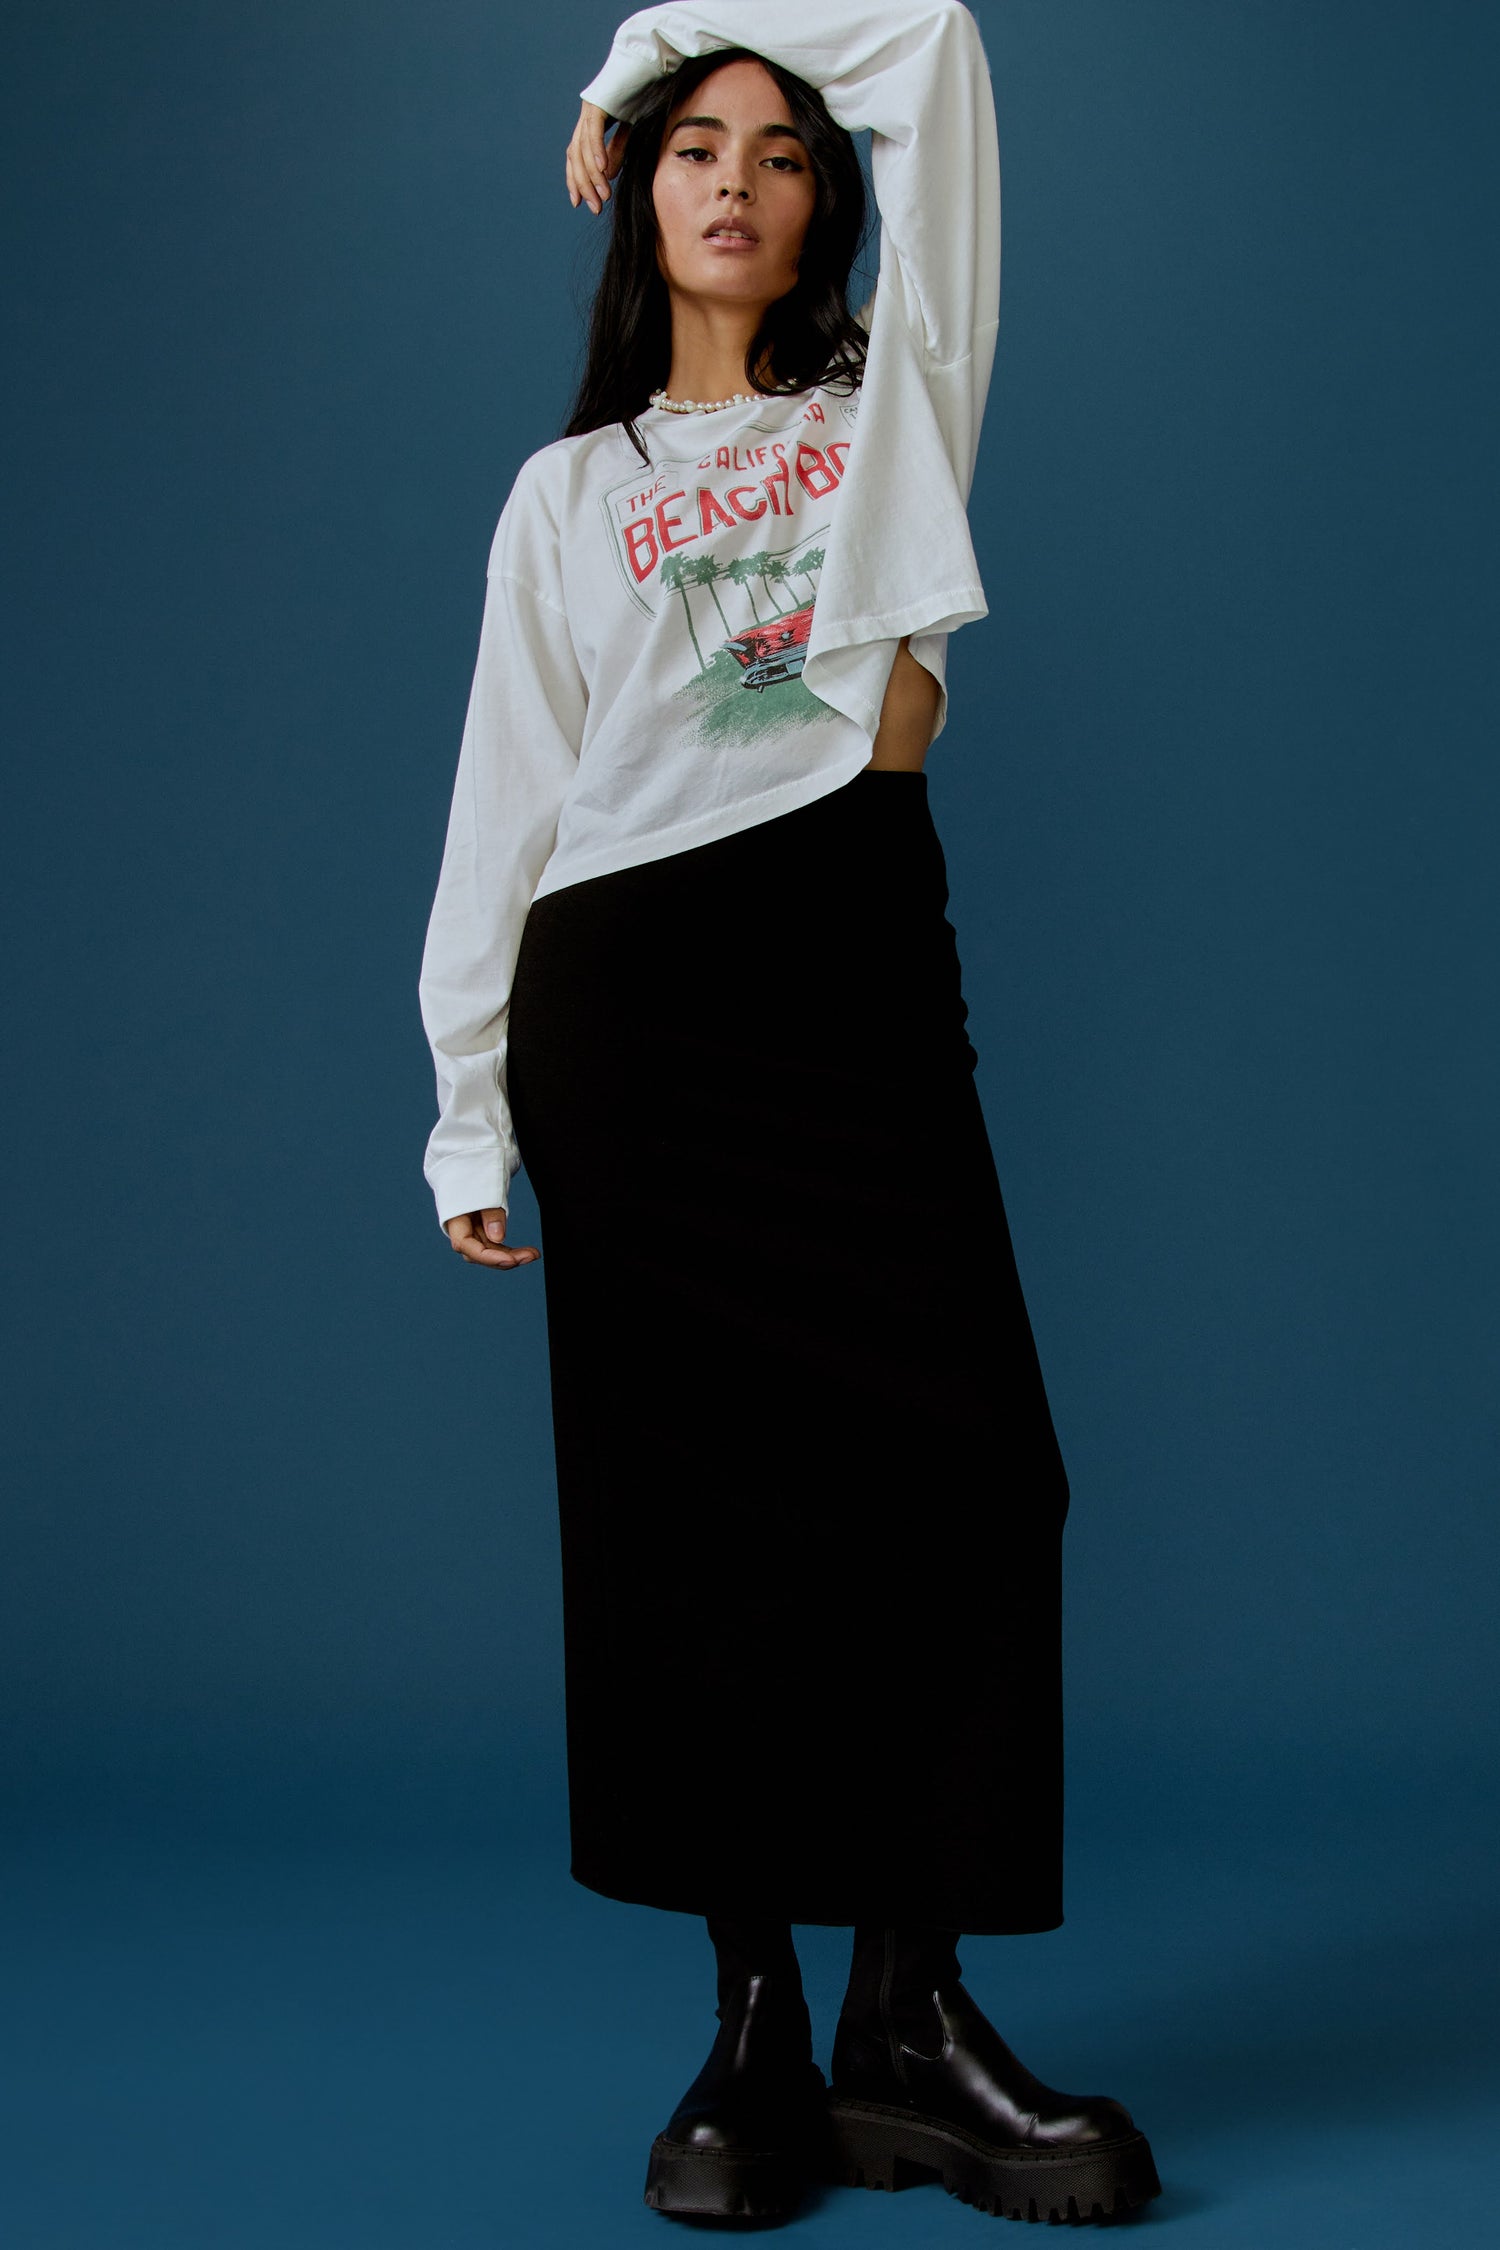 A dark-haired model featuring a white long sleeve stamped with "The Californa Beach Boys" and is desiged with a graphic of trees and cars on the center.